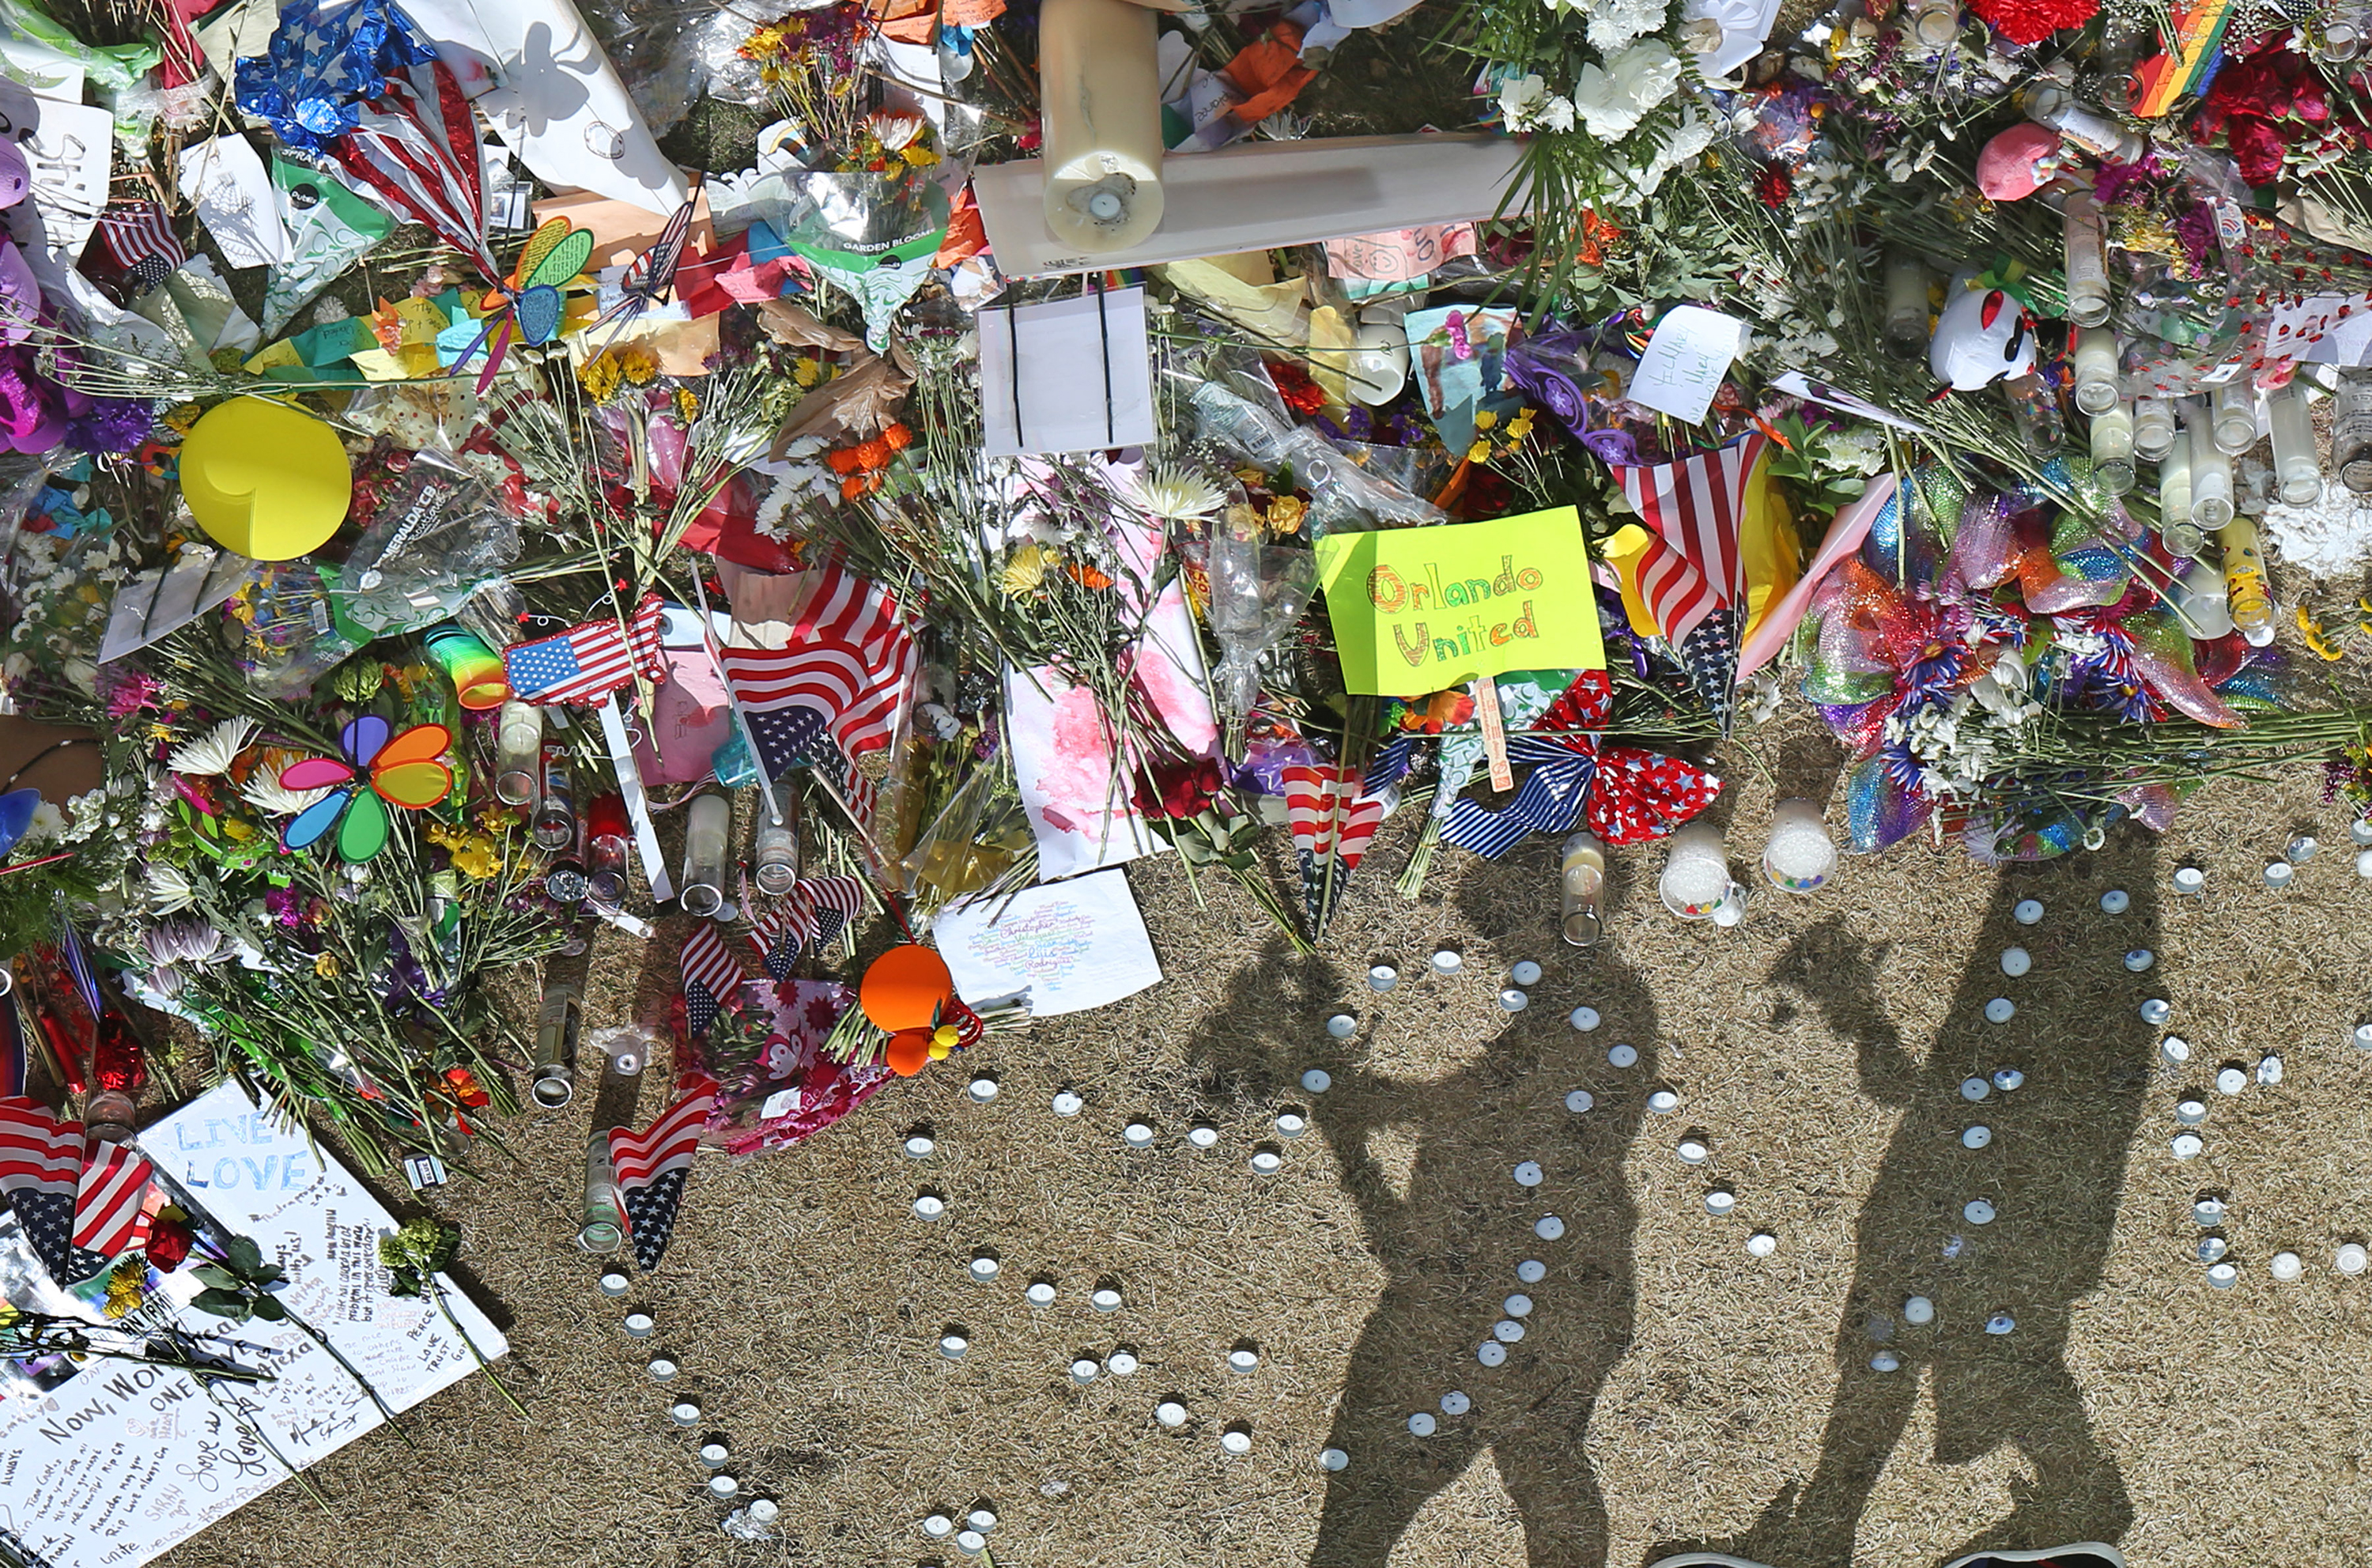 People pay their respects to an ever growing makeshift memorial at the Dr. Phillips Center for the Performing Arts in Orlando, Fla., on Monday, June 20, 2016, just north of the Pulse nightclub shooting scene where 49 people were killed. Orlando Sentinel—TNS via Getty Images (Orlando Sentinel—TNS via Getty Images)